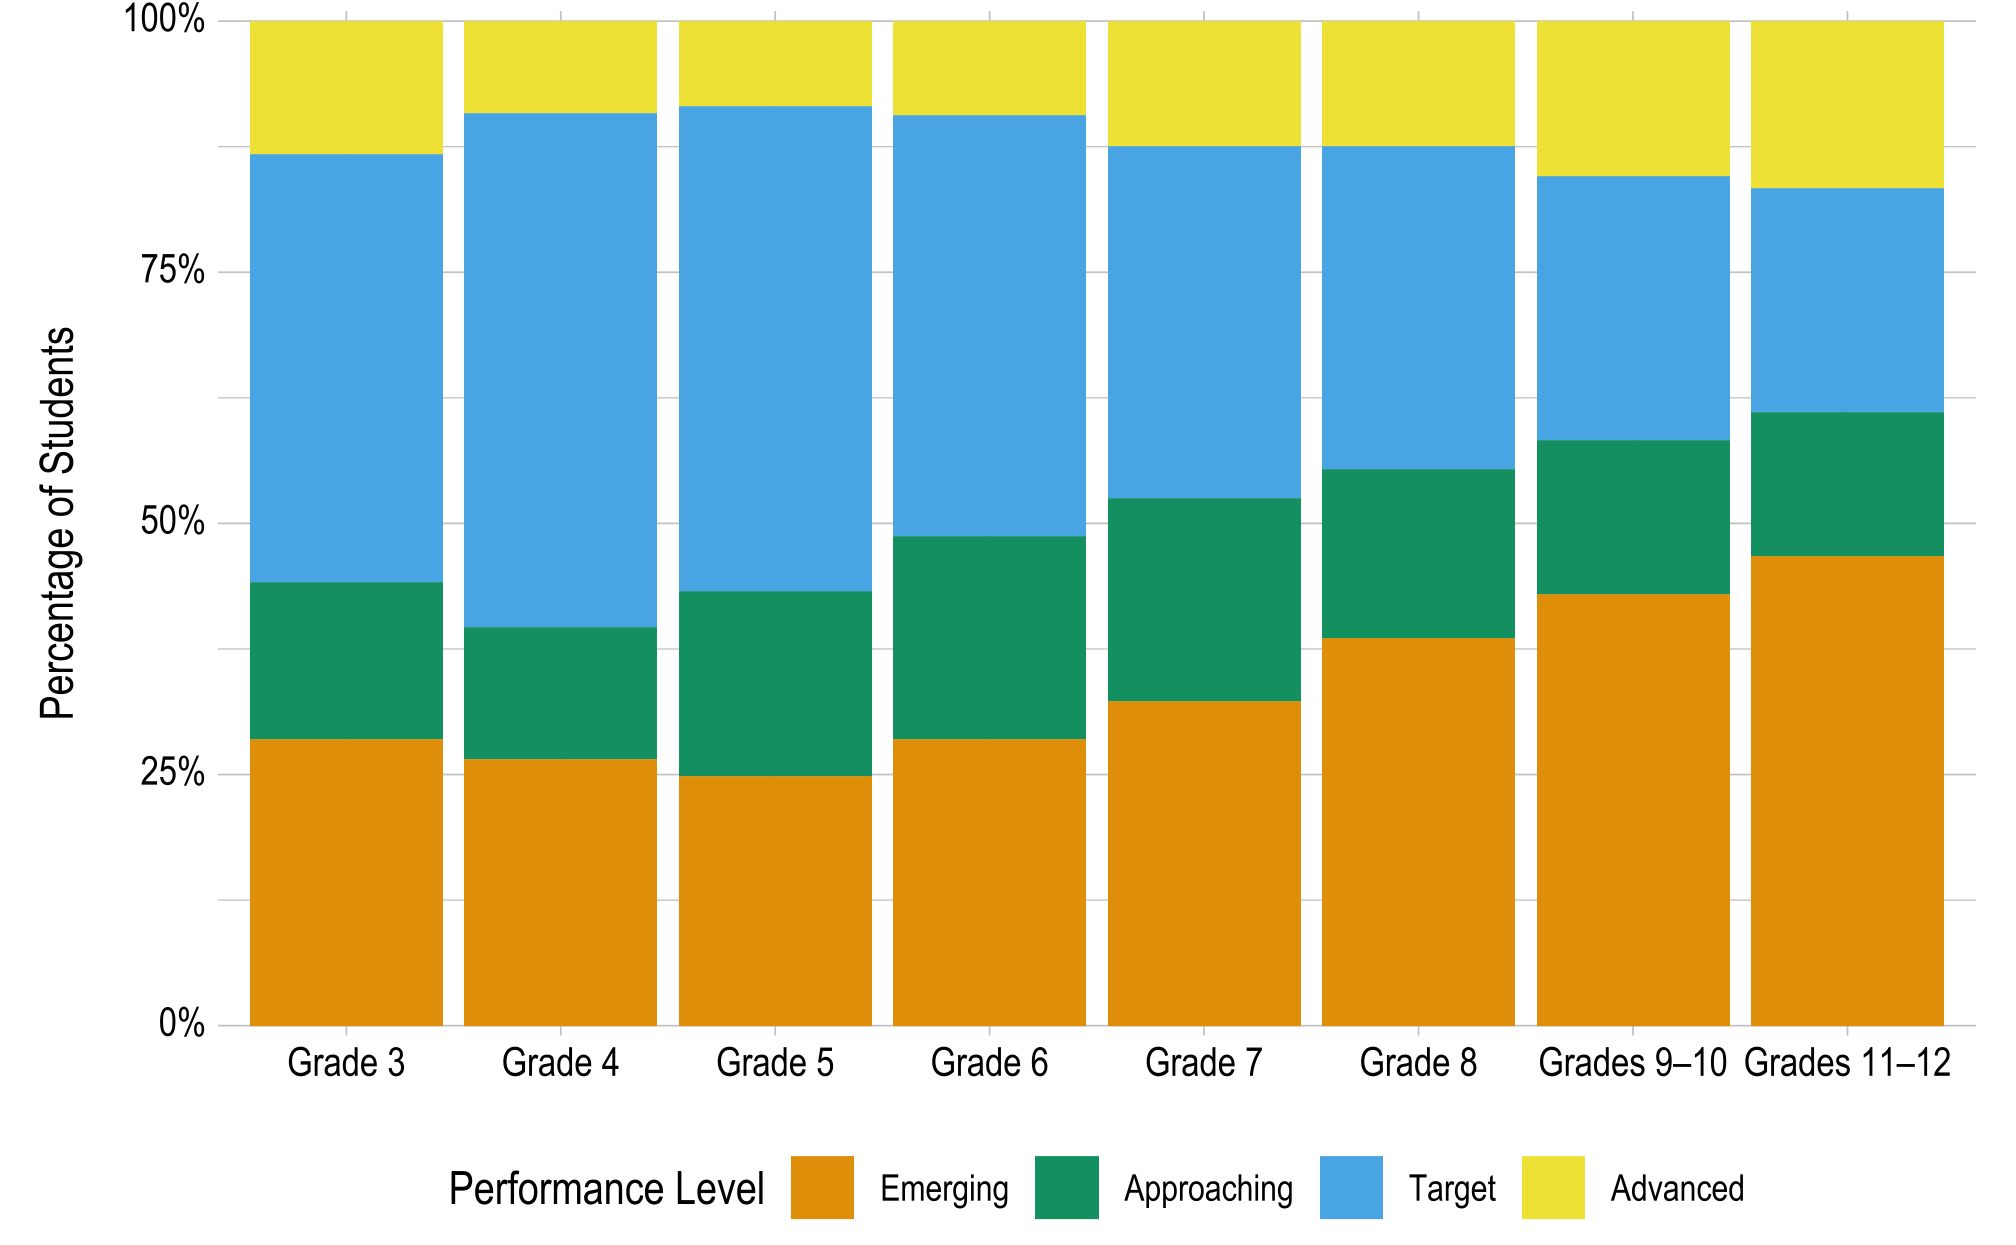 Bar graph, with one column per grade. The bars are all the same height, going to 100%. Each bar is split into four sections showing the percentage of student within each grade that achieved at each performance level in ELA.